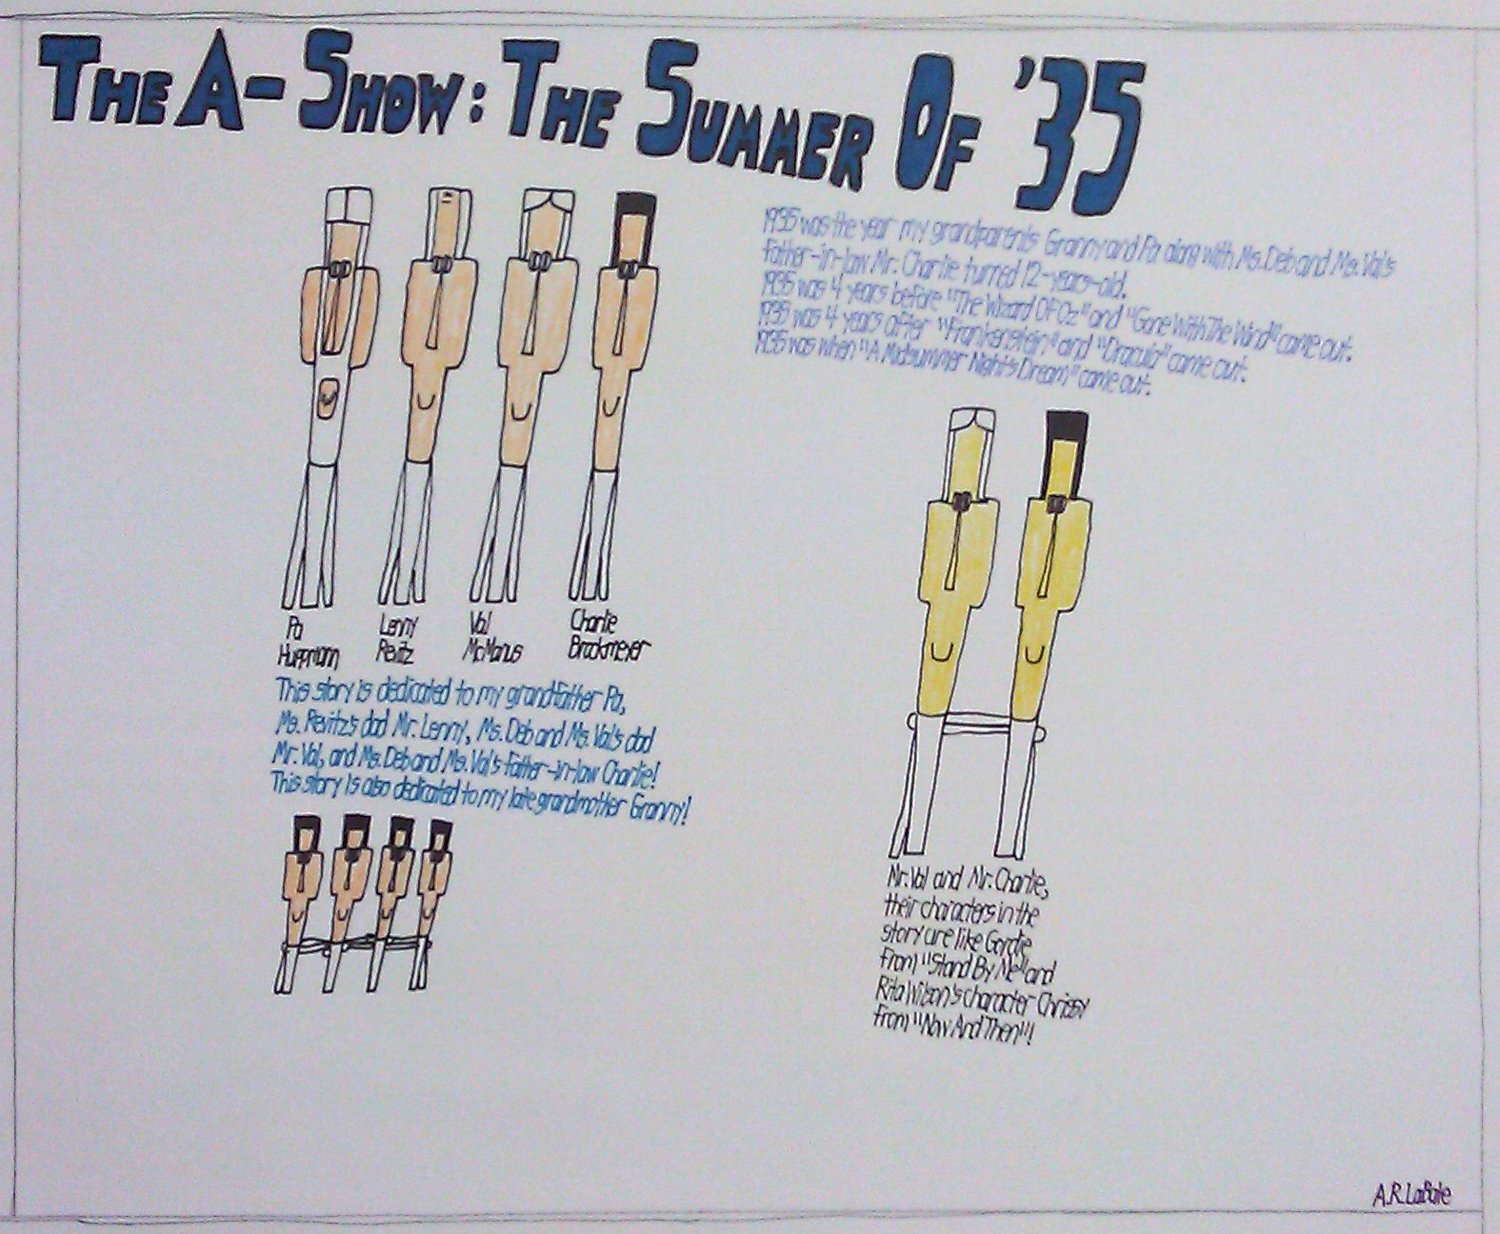 The A-Show: The Summer of ‘35